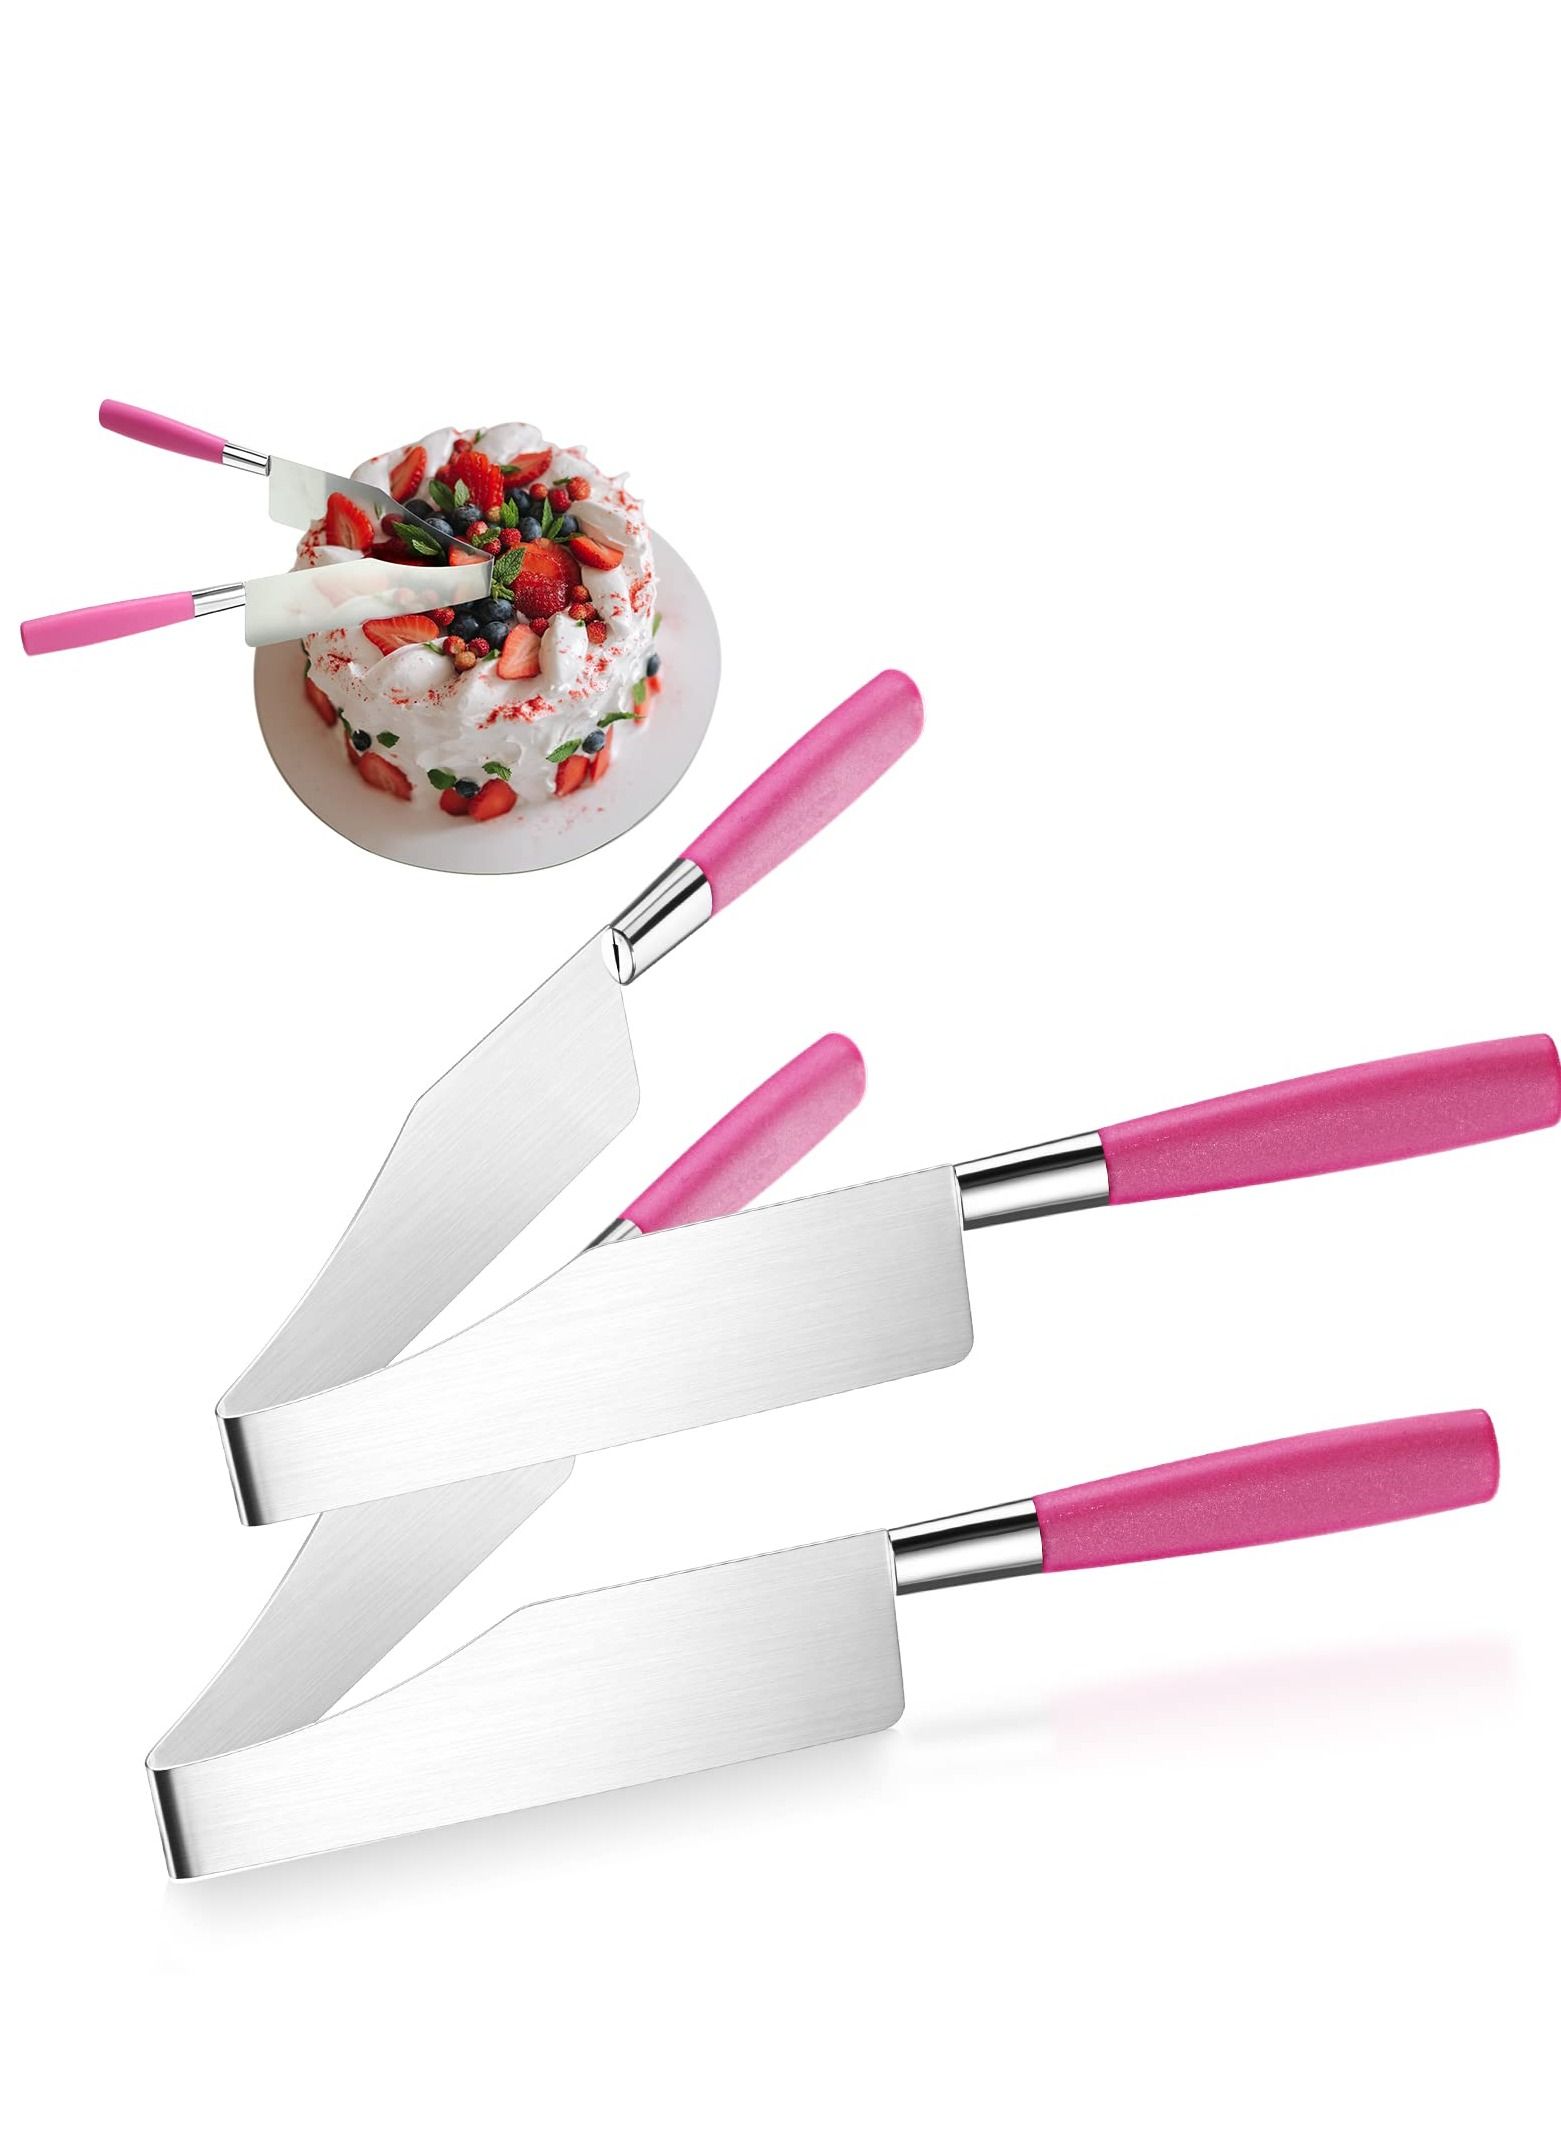 STAINLESS STEEL ADJUSTABLE CAKE SLICER TOOL | DAILY DEAL ME